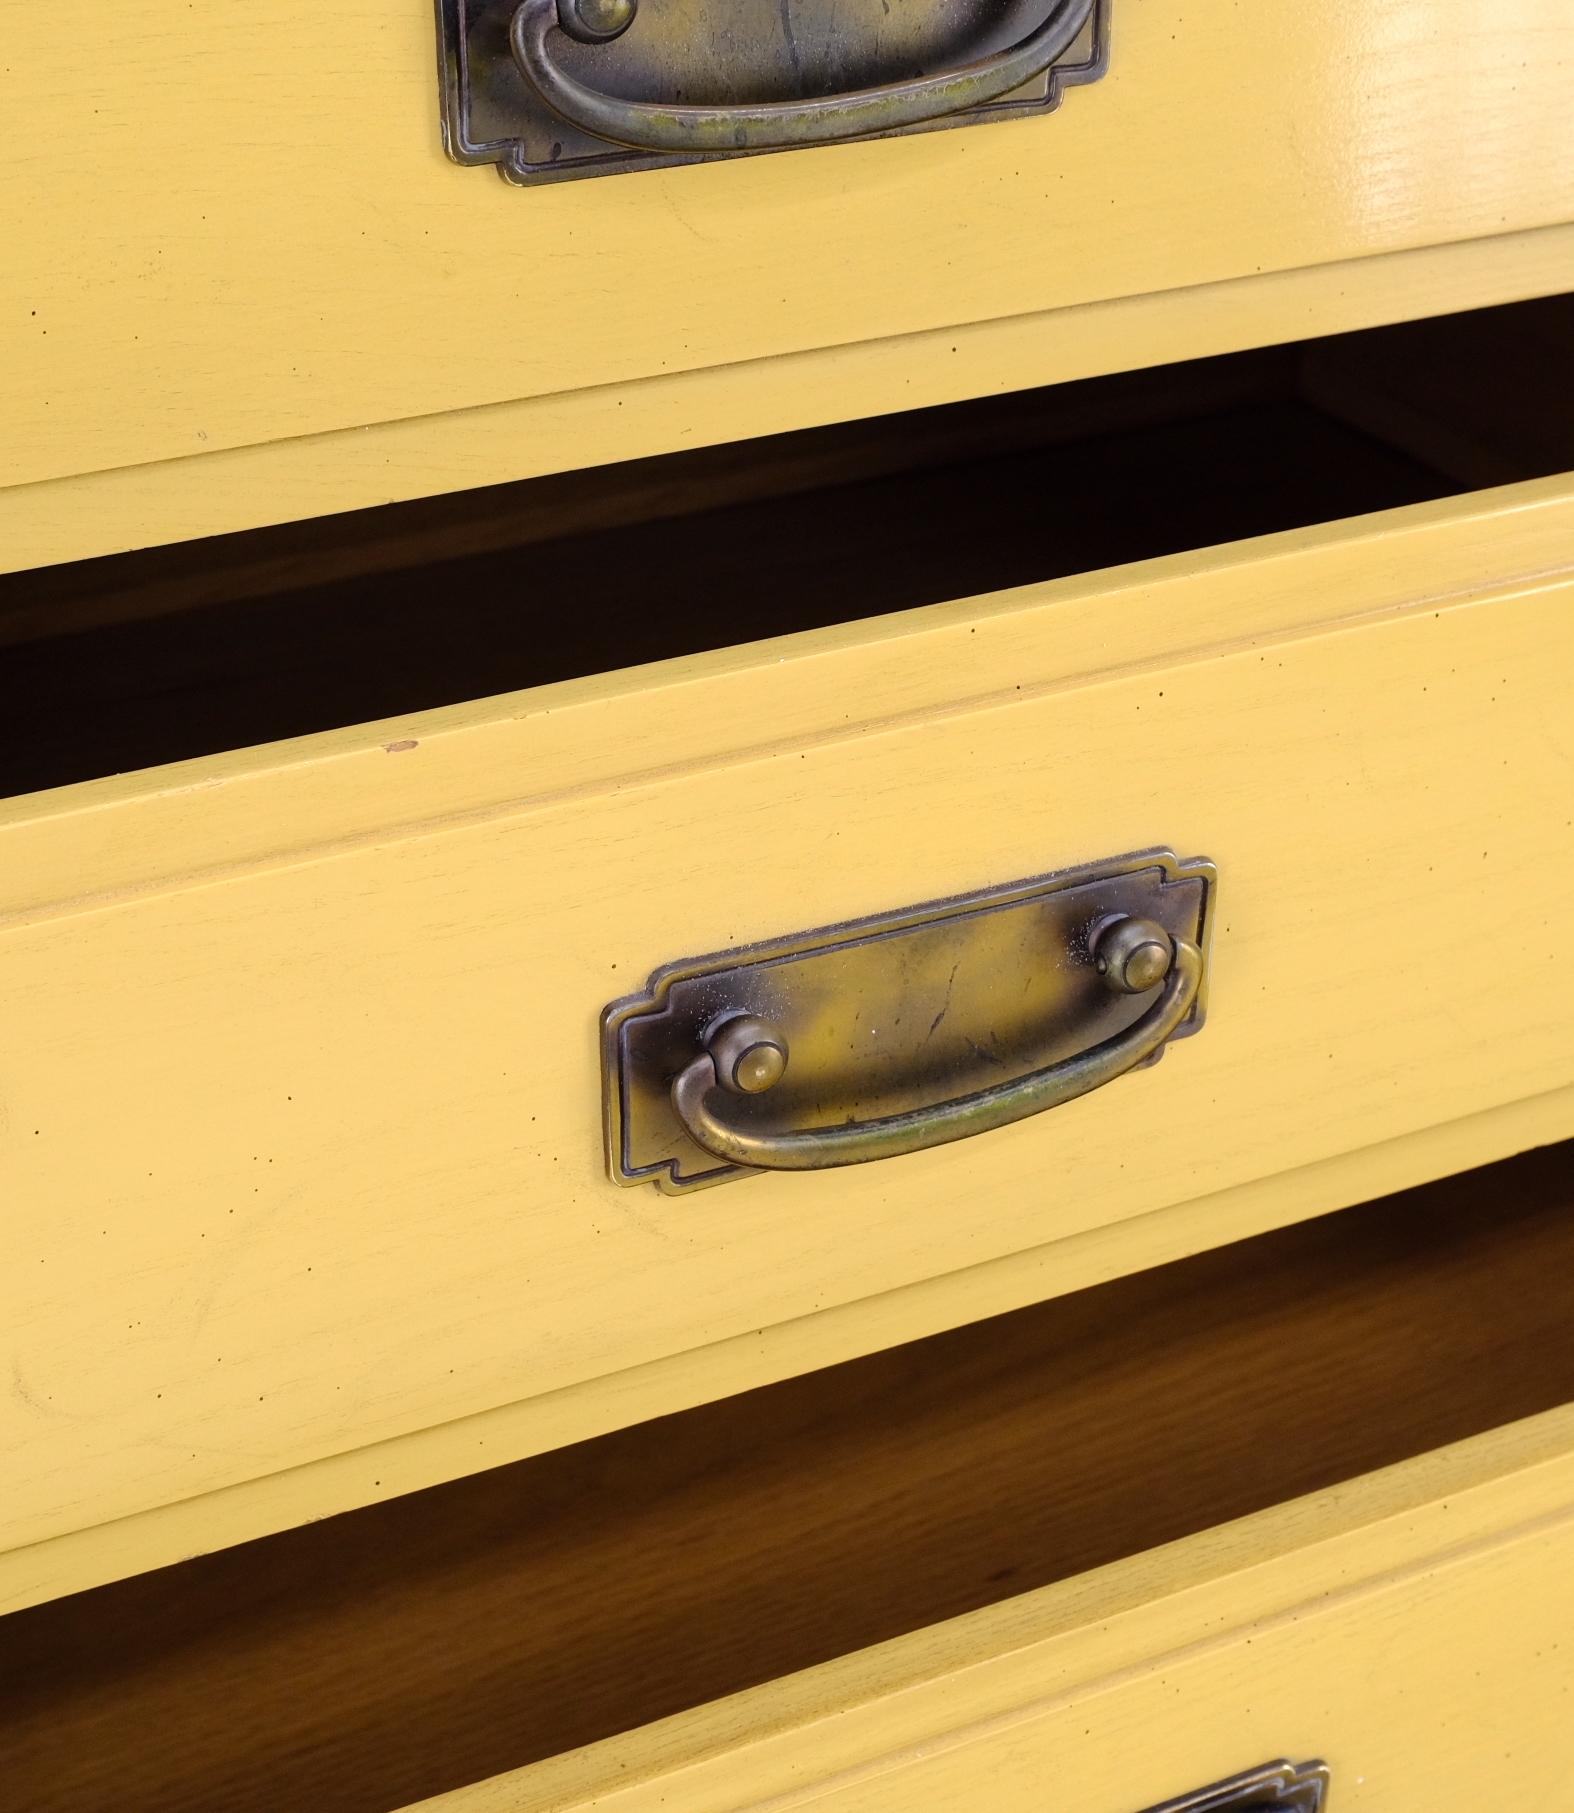 Pair Davis Mid-Century Modern Lemon Yellow Drop Pulls 3 Drawers Bachelor Chests In Good Condition For Sale In Rockaway, NJ